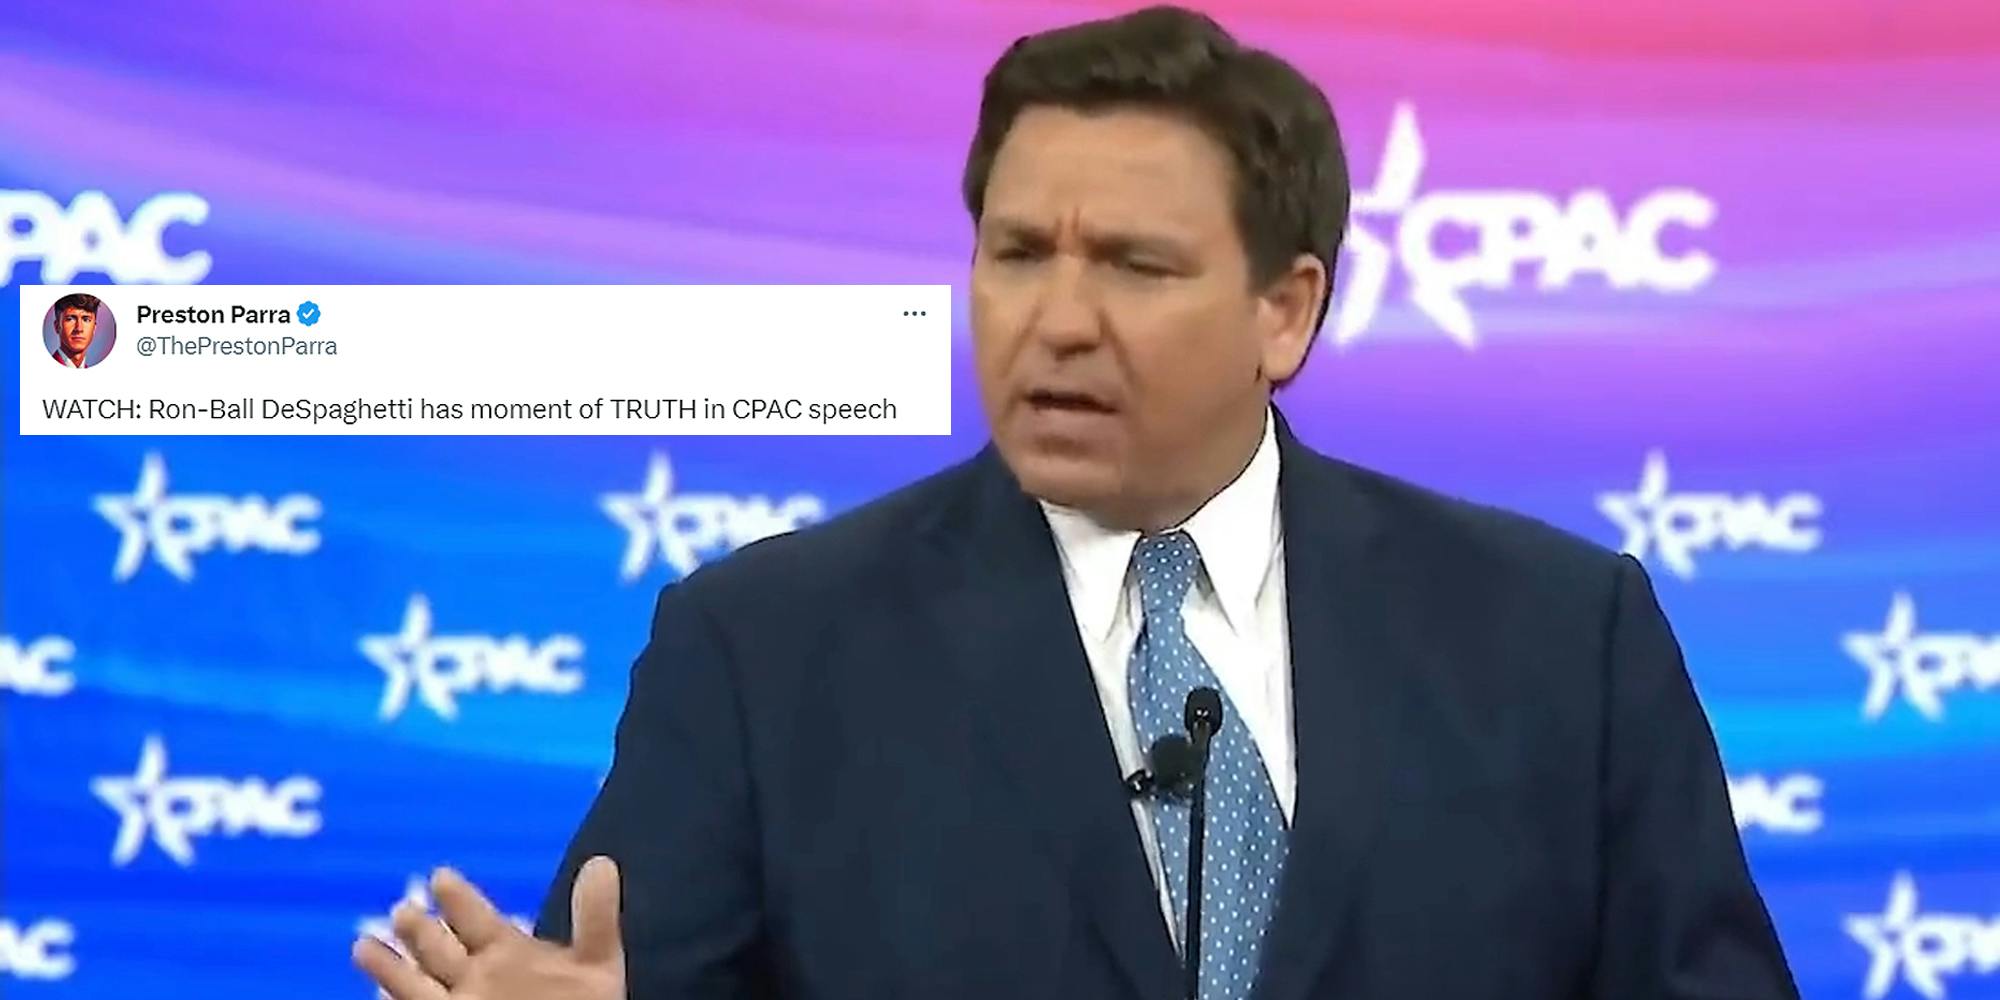 Ron DeSantis speaking in front of purple to blue vertical gradient background with Tweet by Preston Parra to his left "WATCH: Ron-Ball DeSpaghetti has moment of TRUTH in CPAC speech"